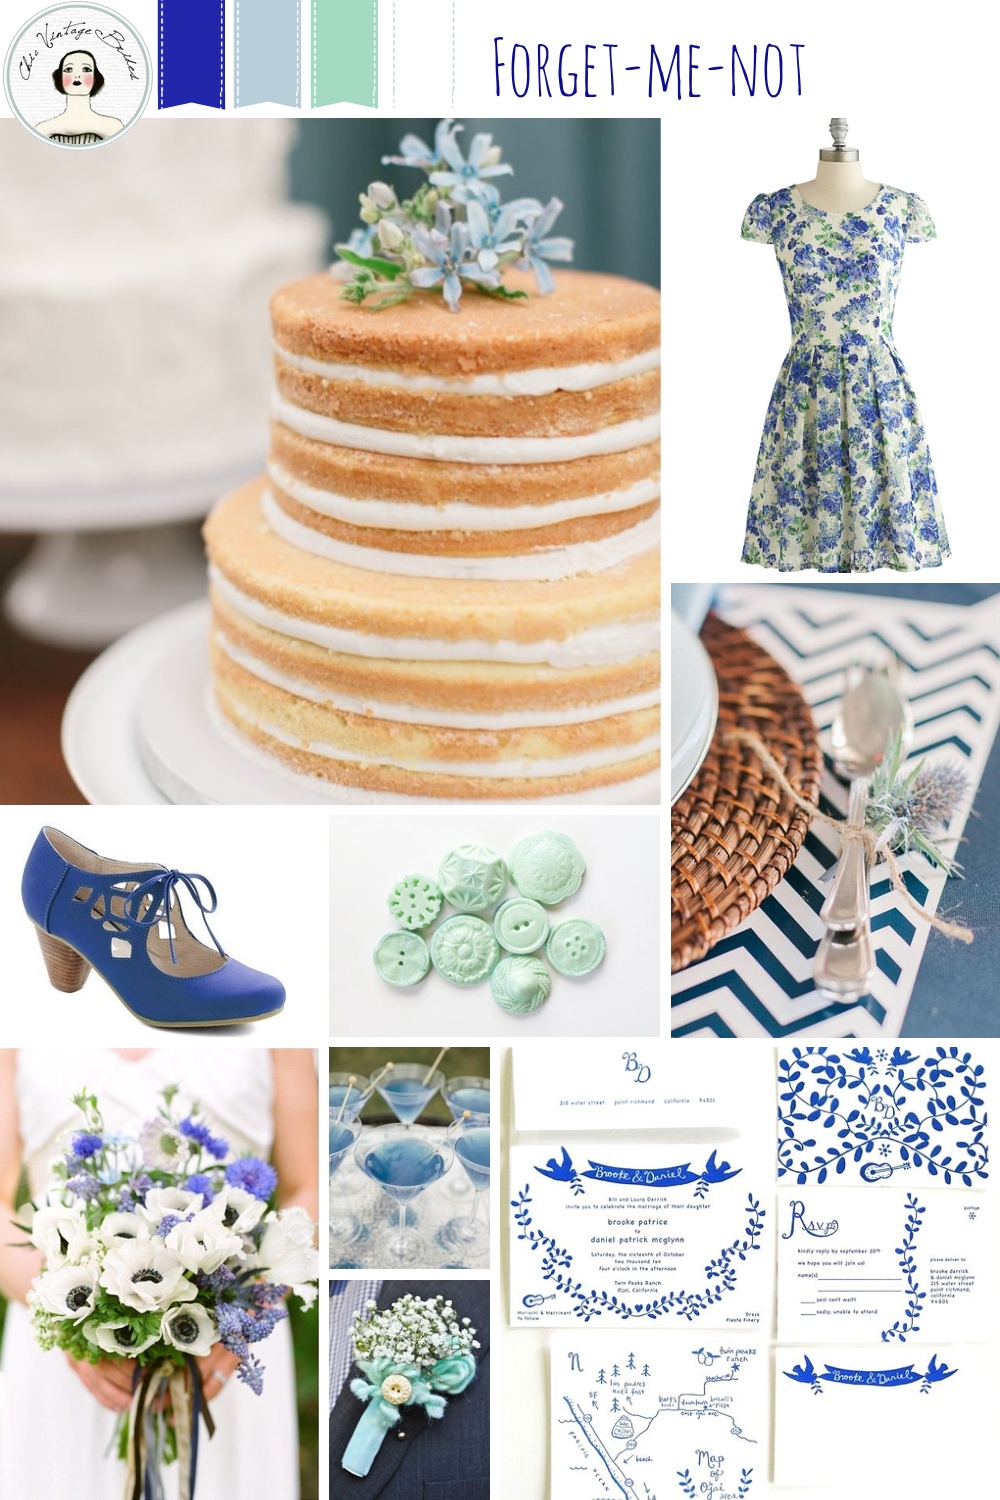 Forget-Me-Not Spring Wedding Inspiration in Shades of Blue & Greyed Jade